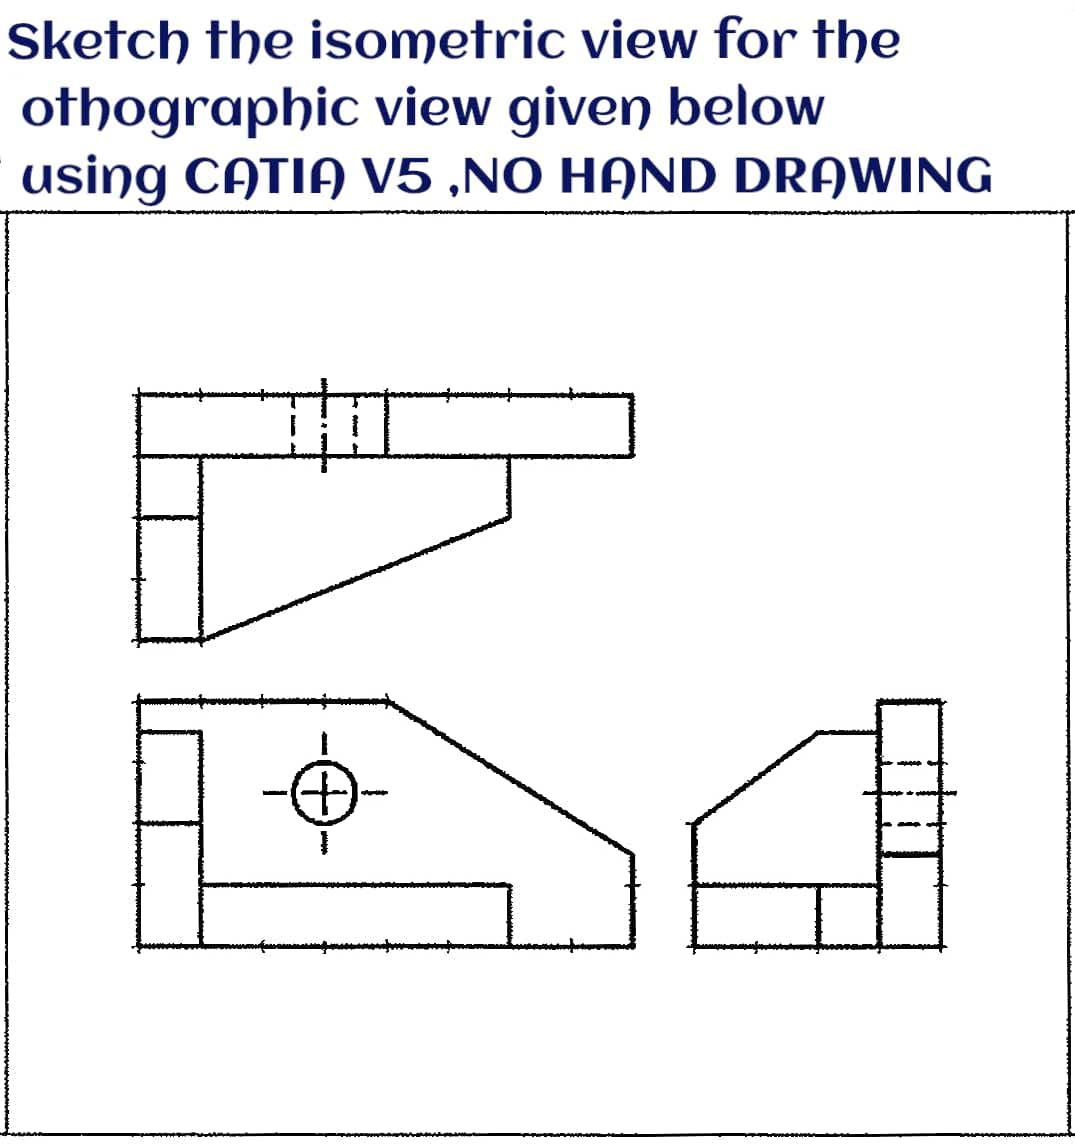 Sketch the isometric view for the
othographic view given below
using CATIA V5 ,NO HAND DRAWING
